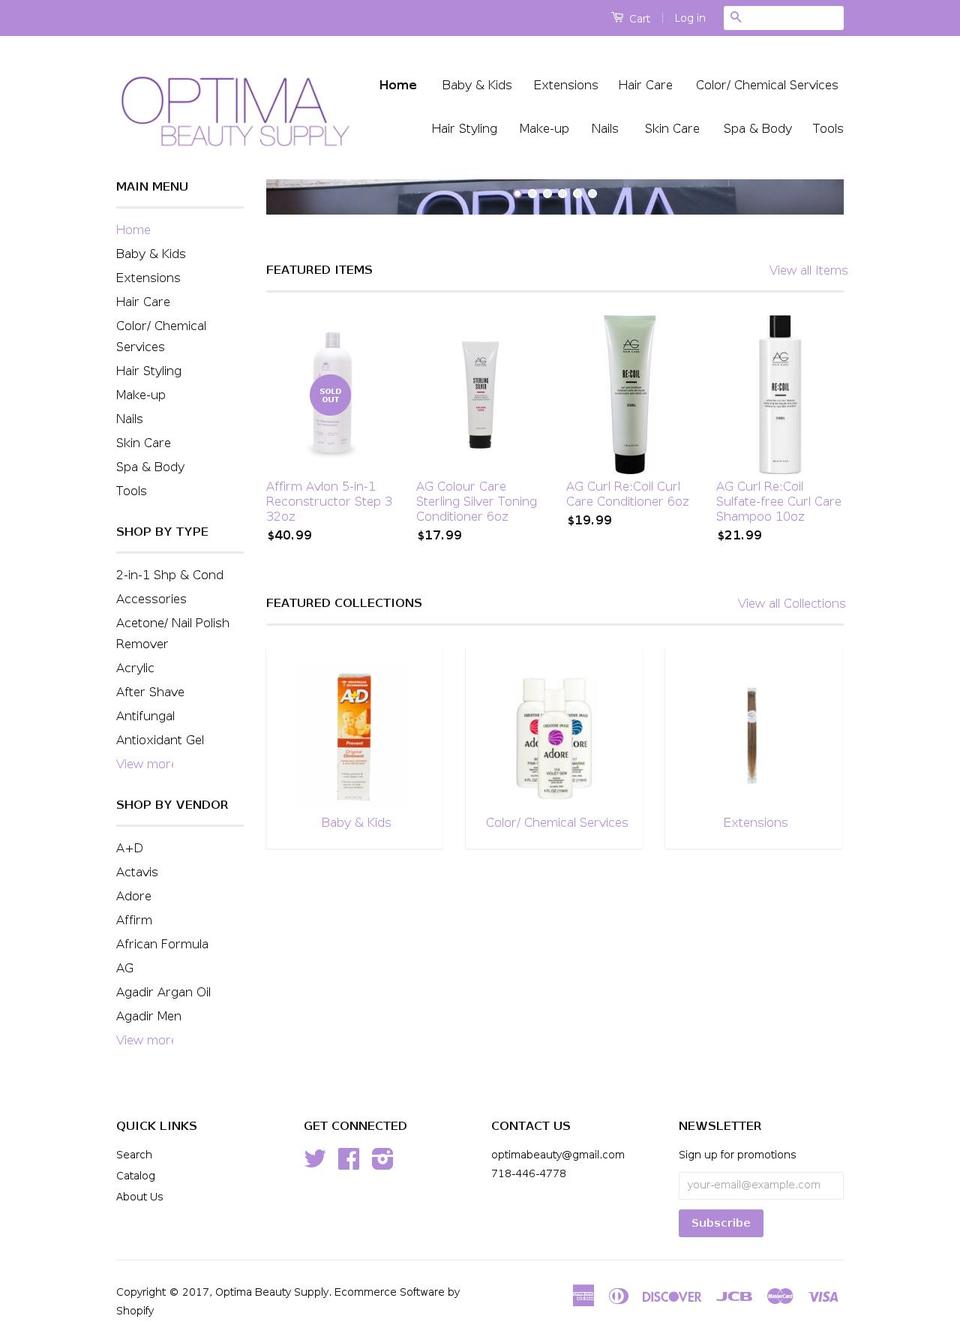 North Shopify theme site example optimabeautysupply.com